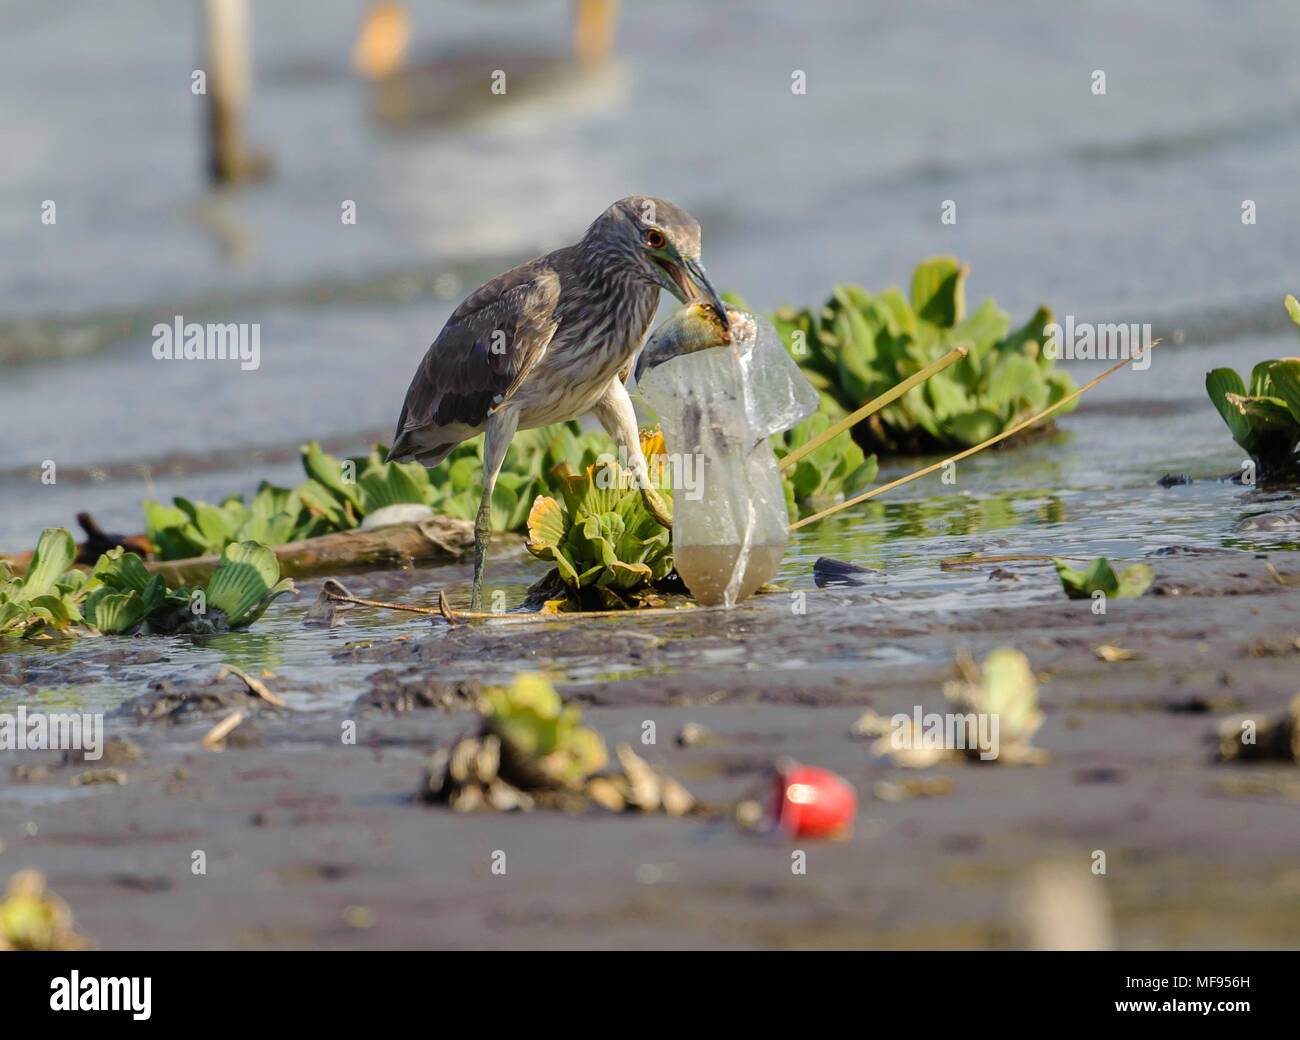 Jocotopec, Jalisco, Mexico, 24 April 2018. In the same week that the largest ever concentration of microplastics is found in the Atlantic Ocean other plastic waste continues to be a life threatening hazard for wildlife everywhere. Here an immature Black-crowned Night Heron (Nycticorax nycticorax) attempts to swallow a plastic bag carelessly discarded with fish inside, Lake Chapala. Consuming the bag is certain death. Most retailer stores and supermarkets in Mexico continue to use plastic bags at checkouts. Peter Llewellyn/Alamy News Stock Photo